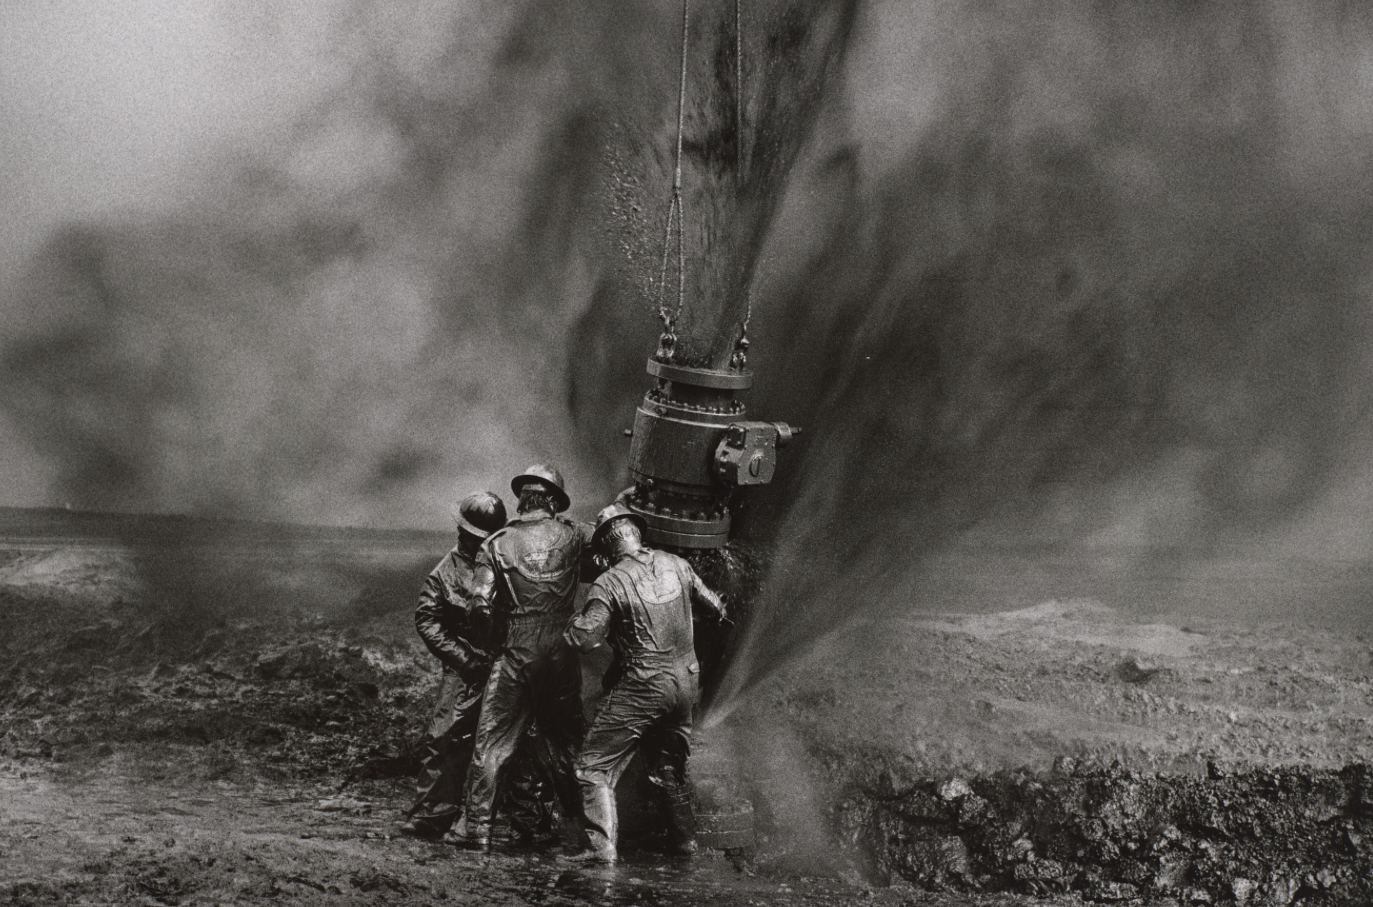   Sebastião Salgado  Brazil, born 1944   Capping a Well Head, Greater Burhan Oil Wells, Kuwait , 1991 gelatin silver print, 13 x 19 1/2 inches Promised Gift from the Judy Glickman Lauder Collection, 4.2014.6 